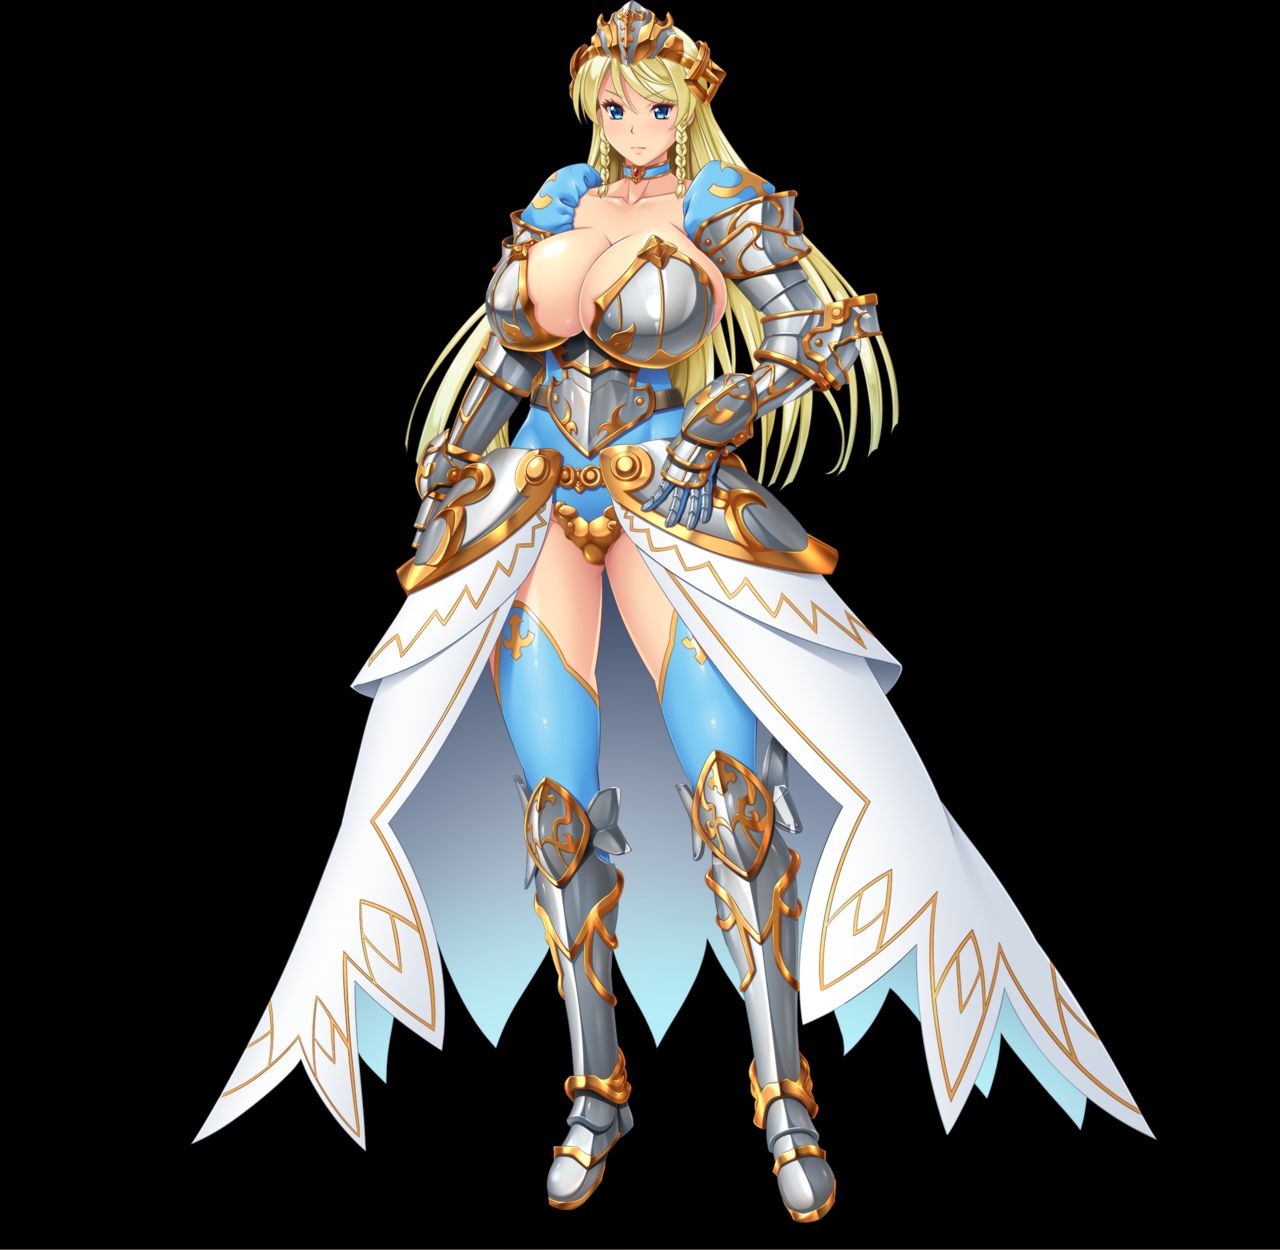 The Big ImageBoard (TBIB) - armor blonde hair clevage huge breasts knight 6...